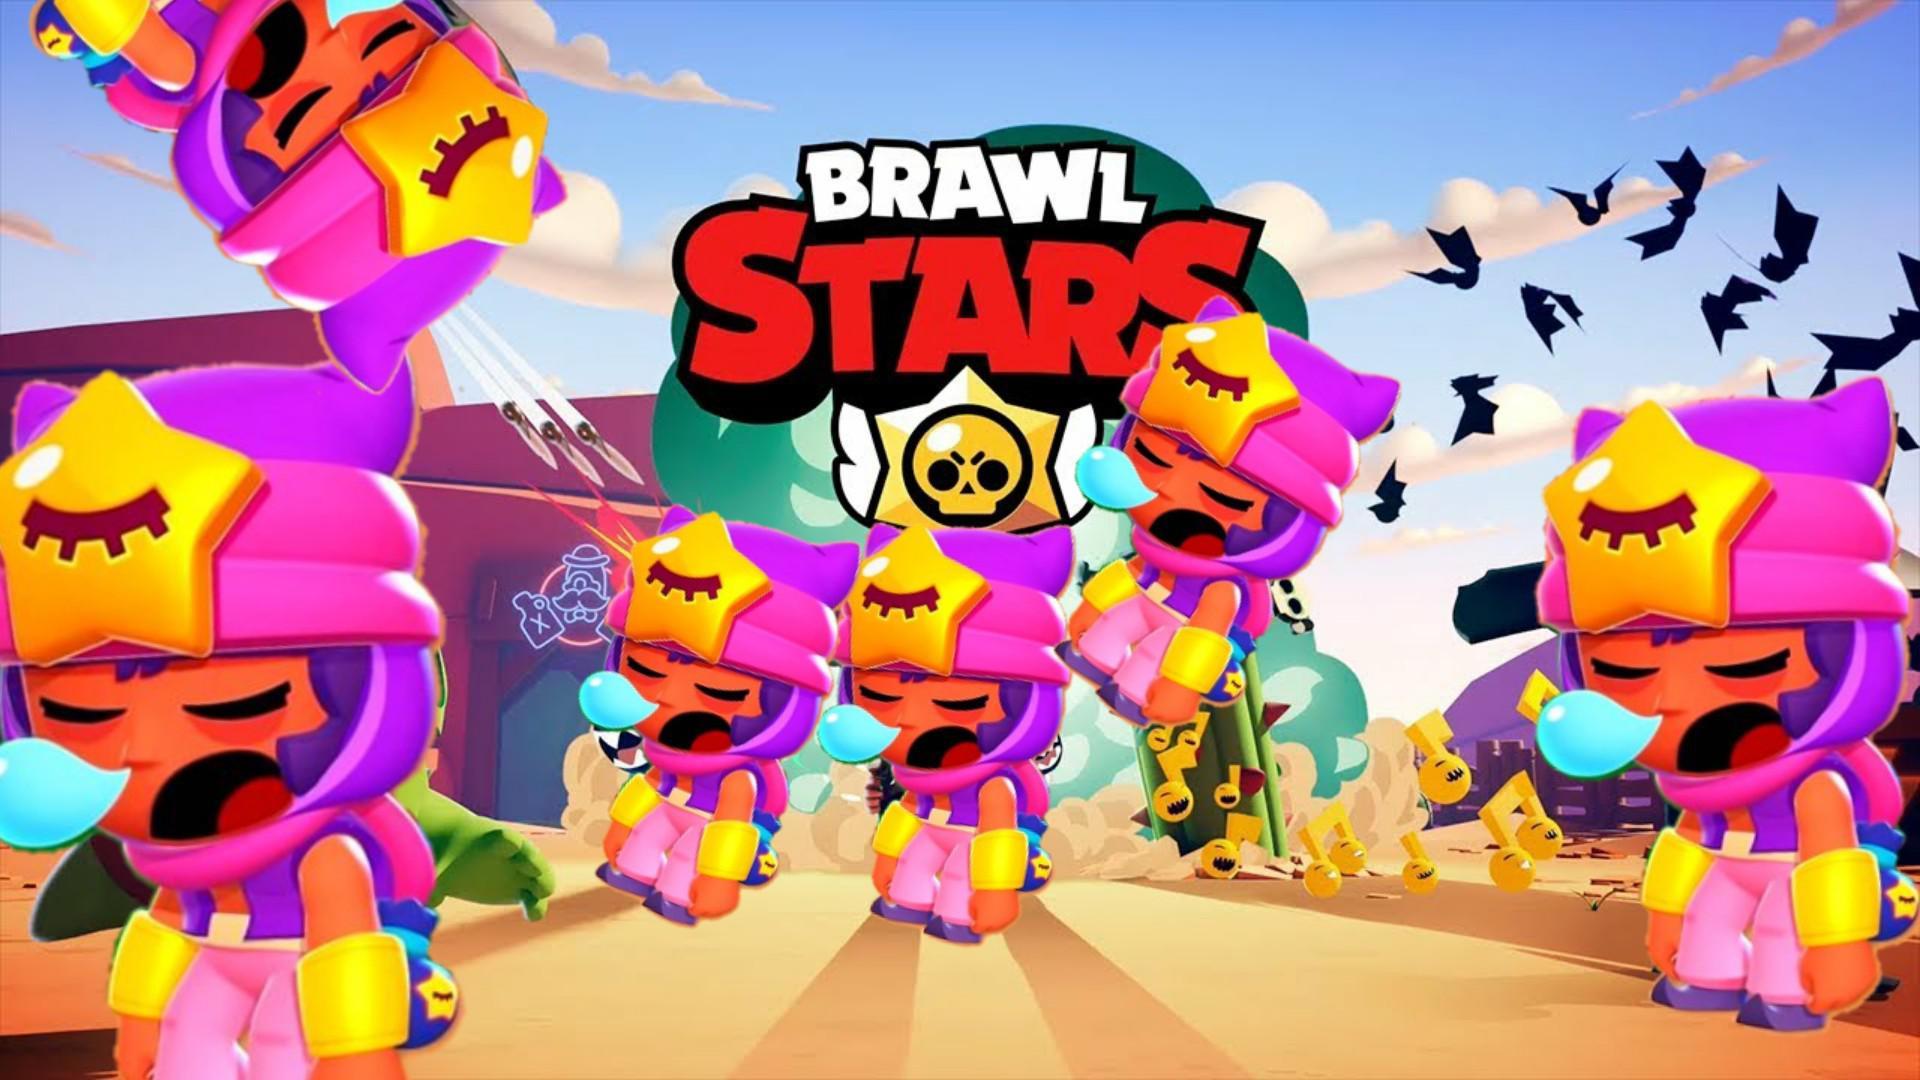 Brawl stars when sandy came out